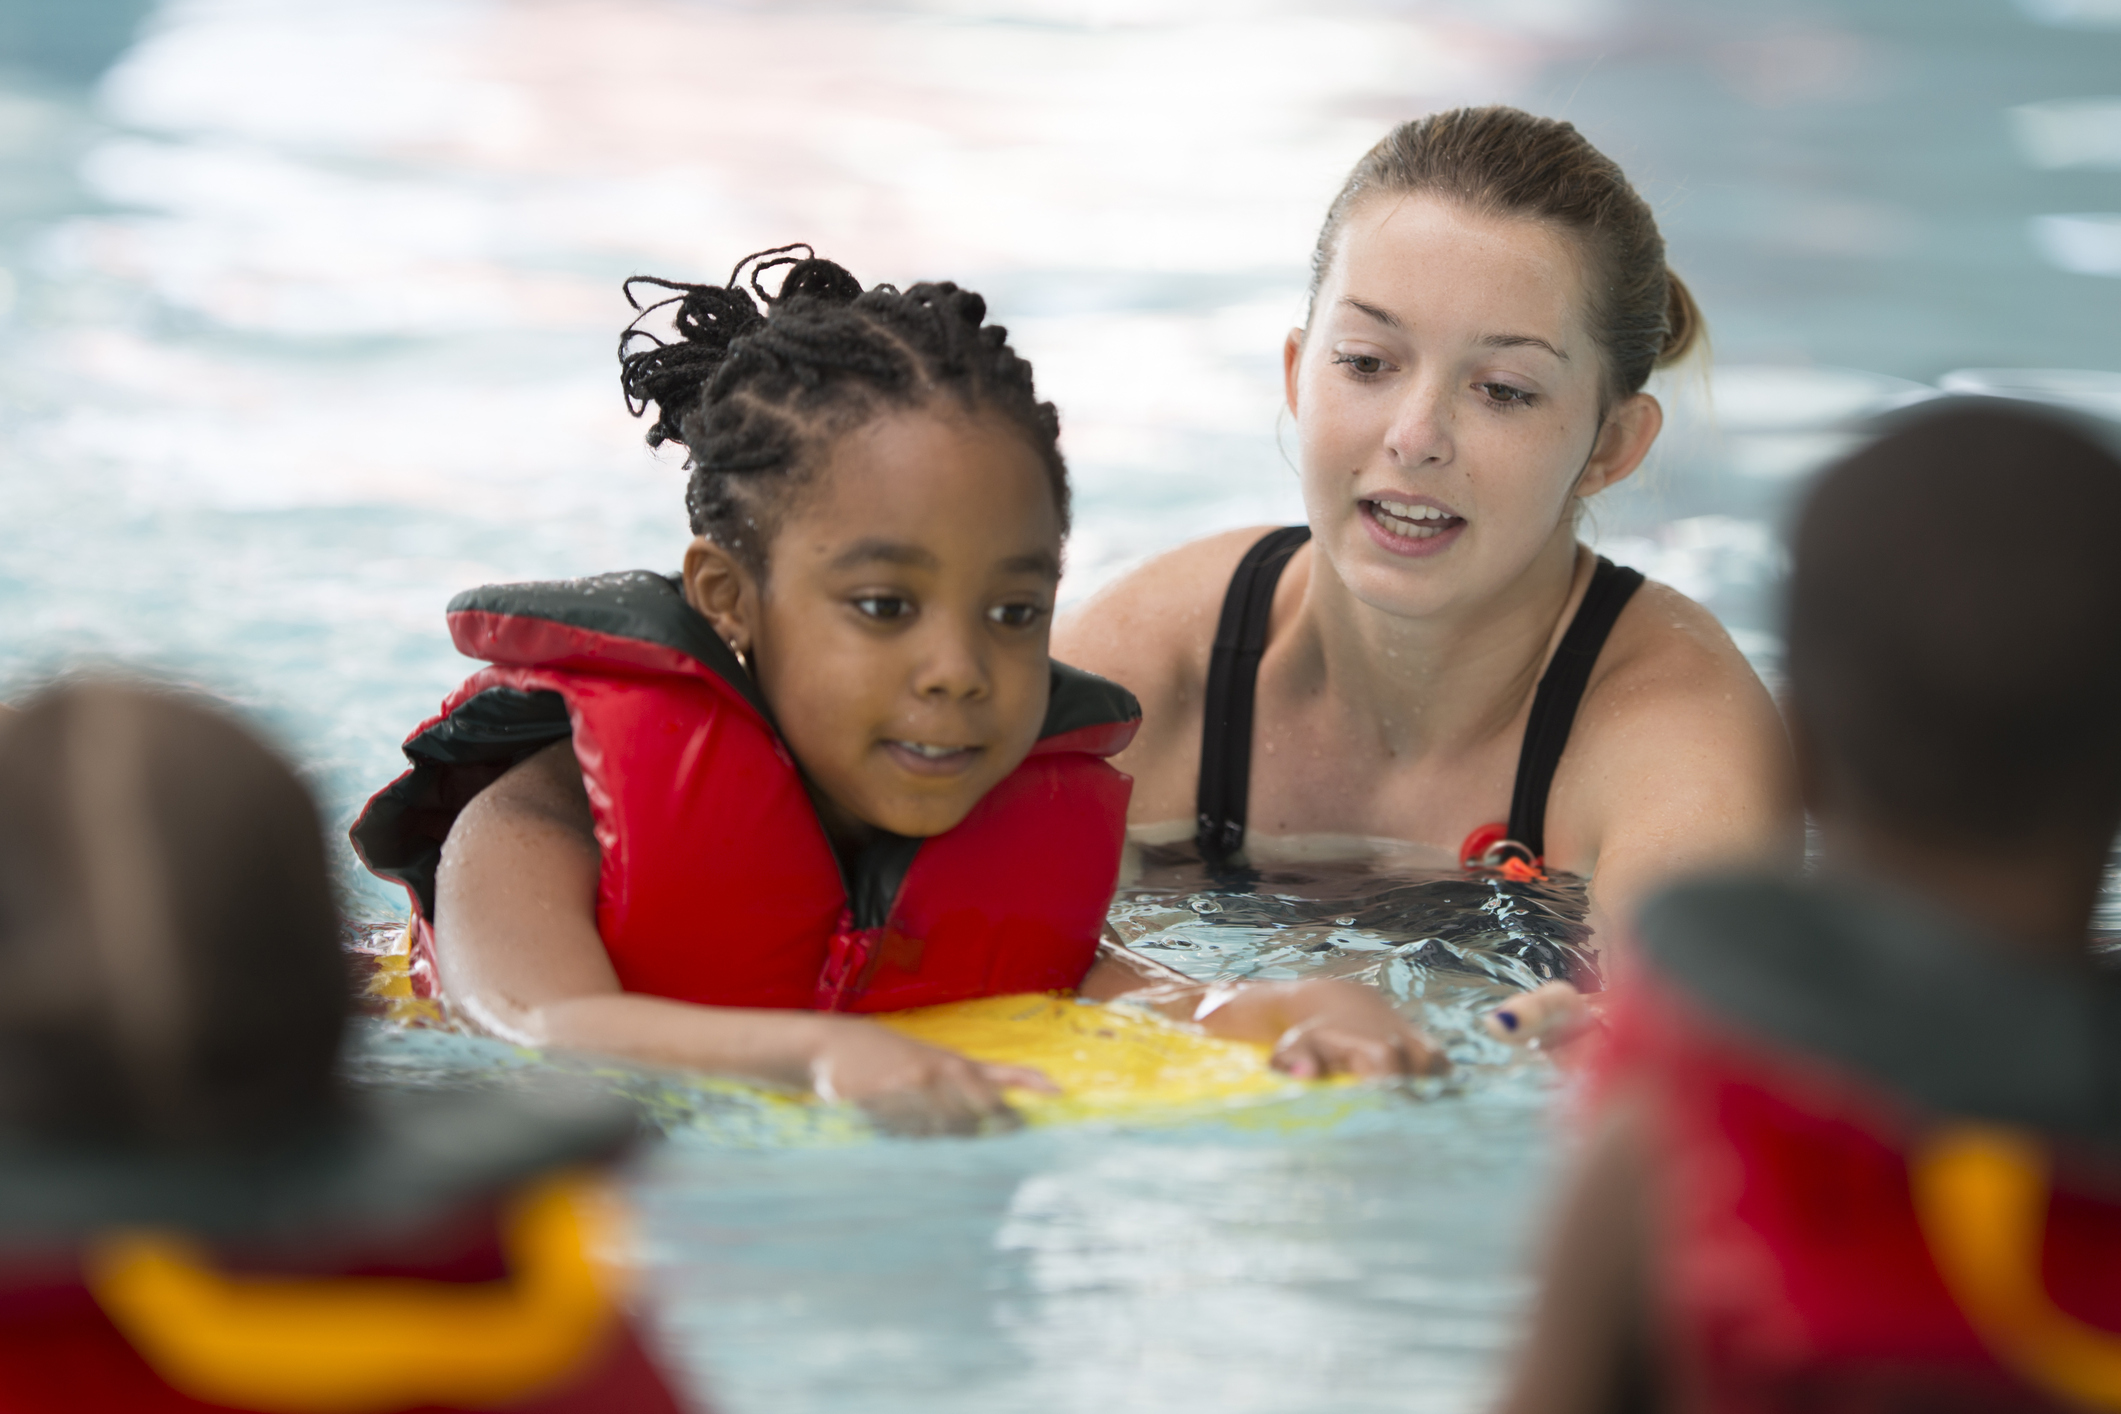 Trainer helping a child to learn how to swim in the pool